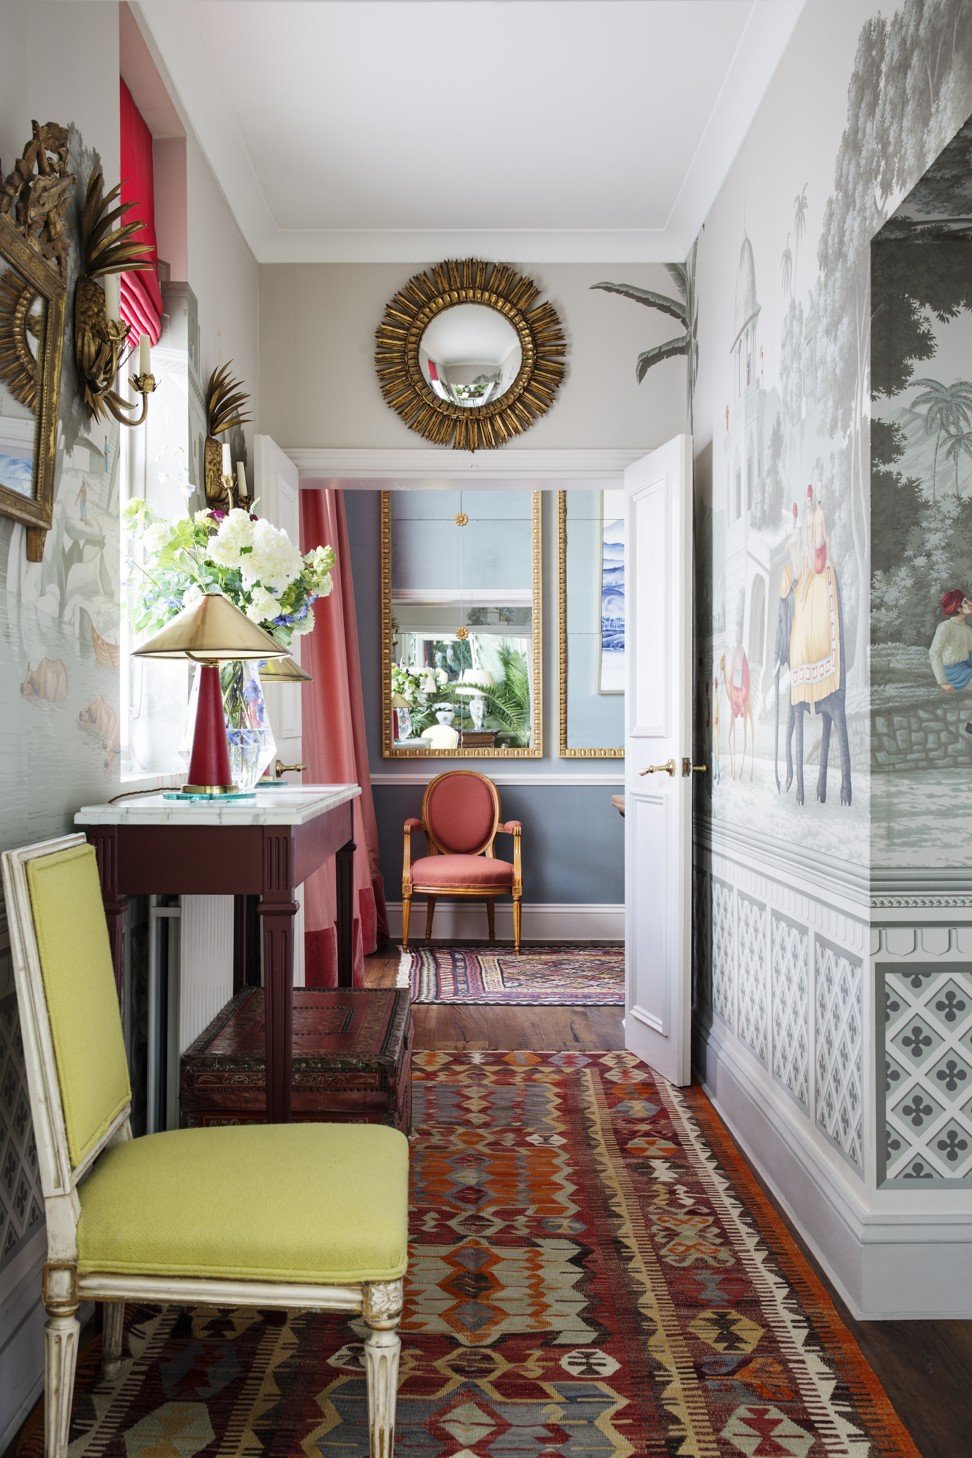 The panorama wallpaper in the hall is called ‘Early Views’ and is hand-painted, like all de Gournay wallpapers. 